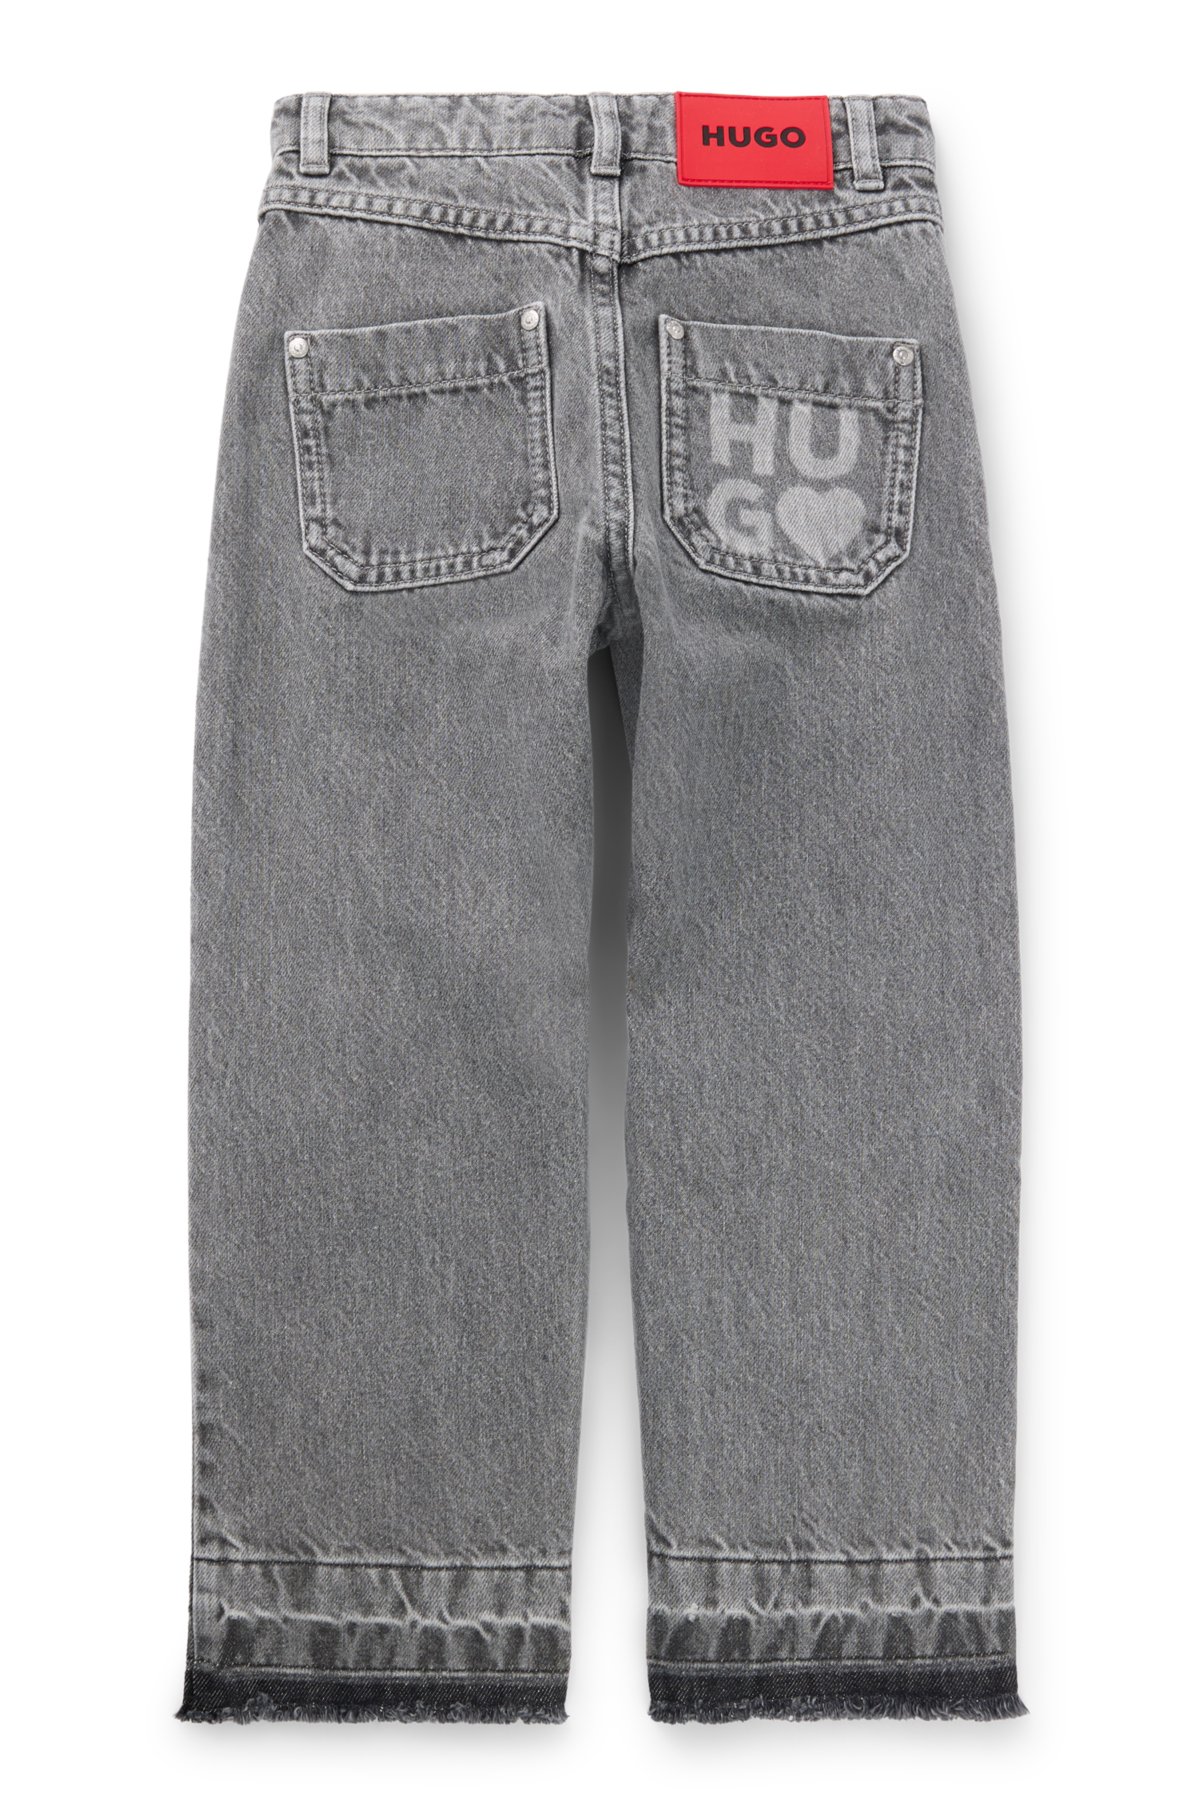 Kids' relaxed-fit jeans in grey cotton denim, Patterned